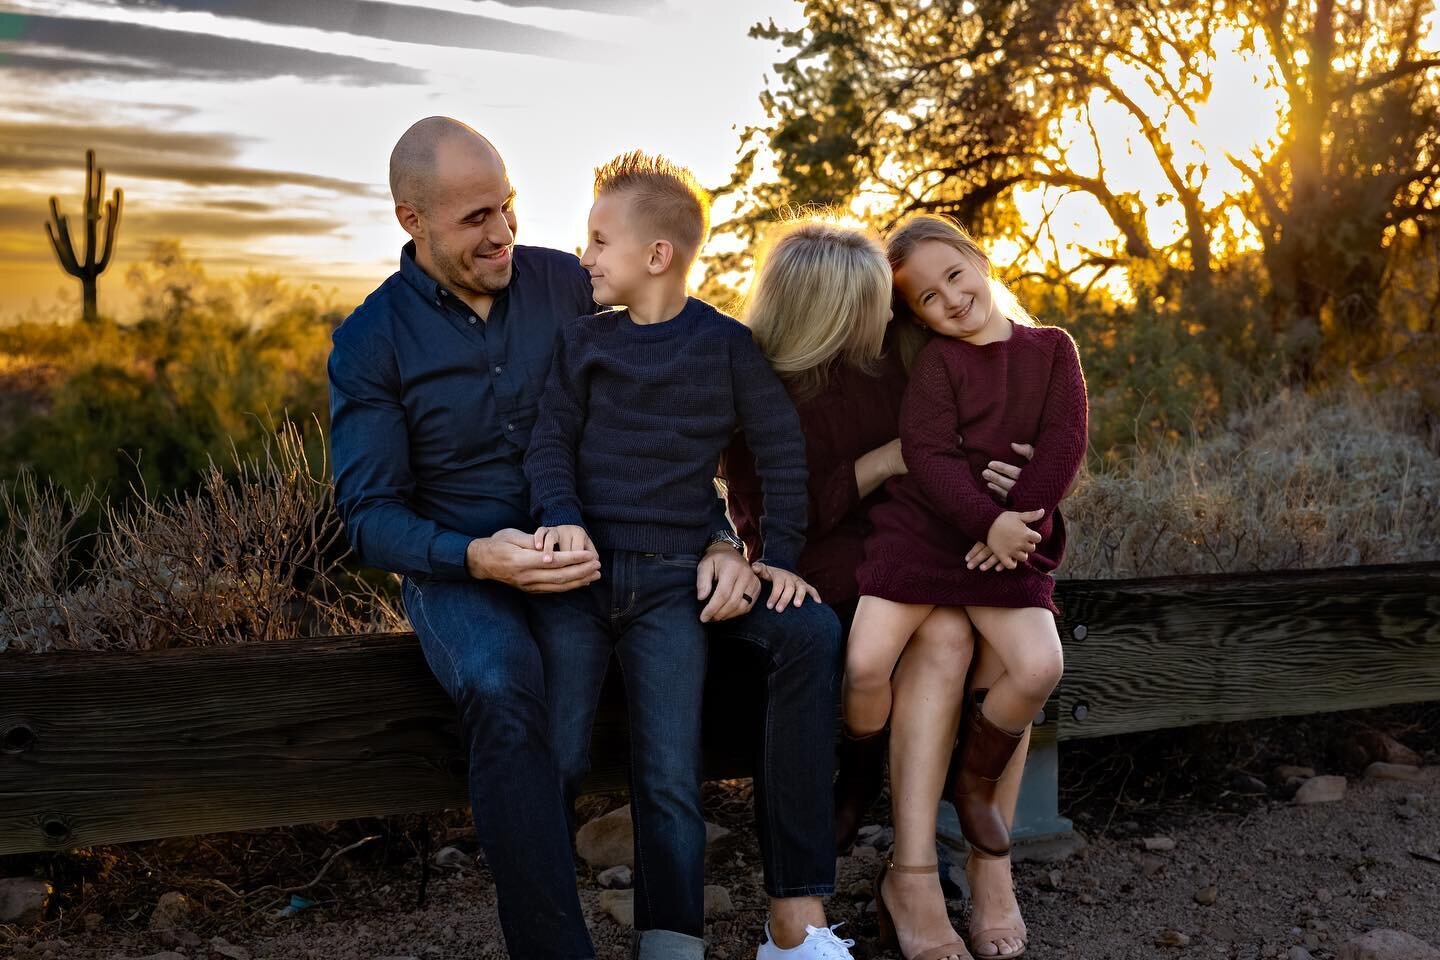 December was a busy month and I&rsquo;m so grateful for all my clients.

Taking pictures of this cute family was super special. We had a lot of fun and I could capture feelings, hugs, smiles and moments that these kids will can look back on when they